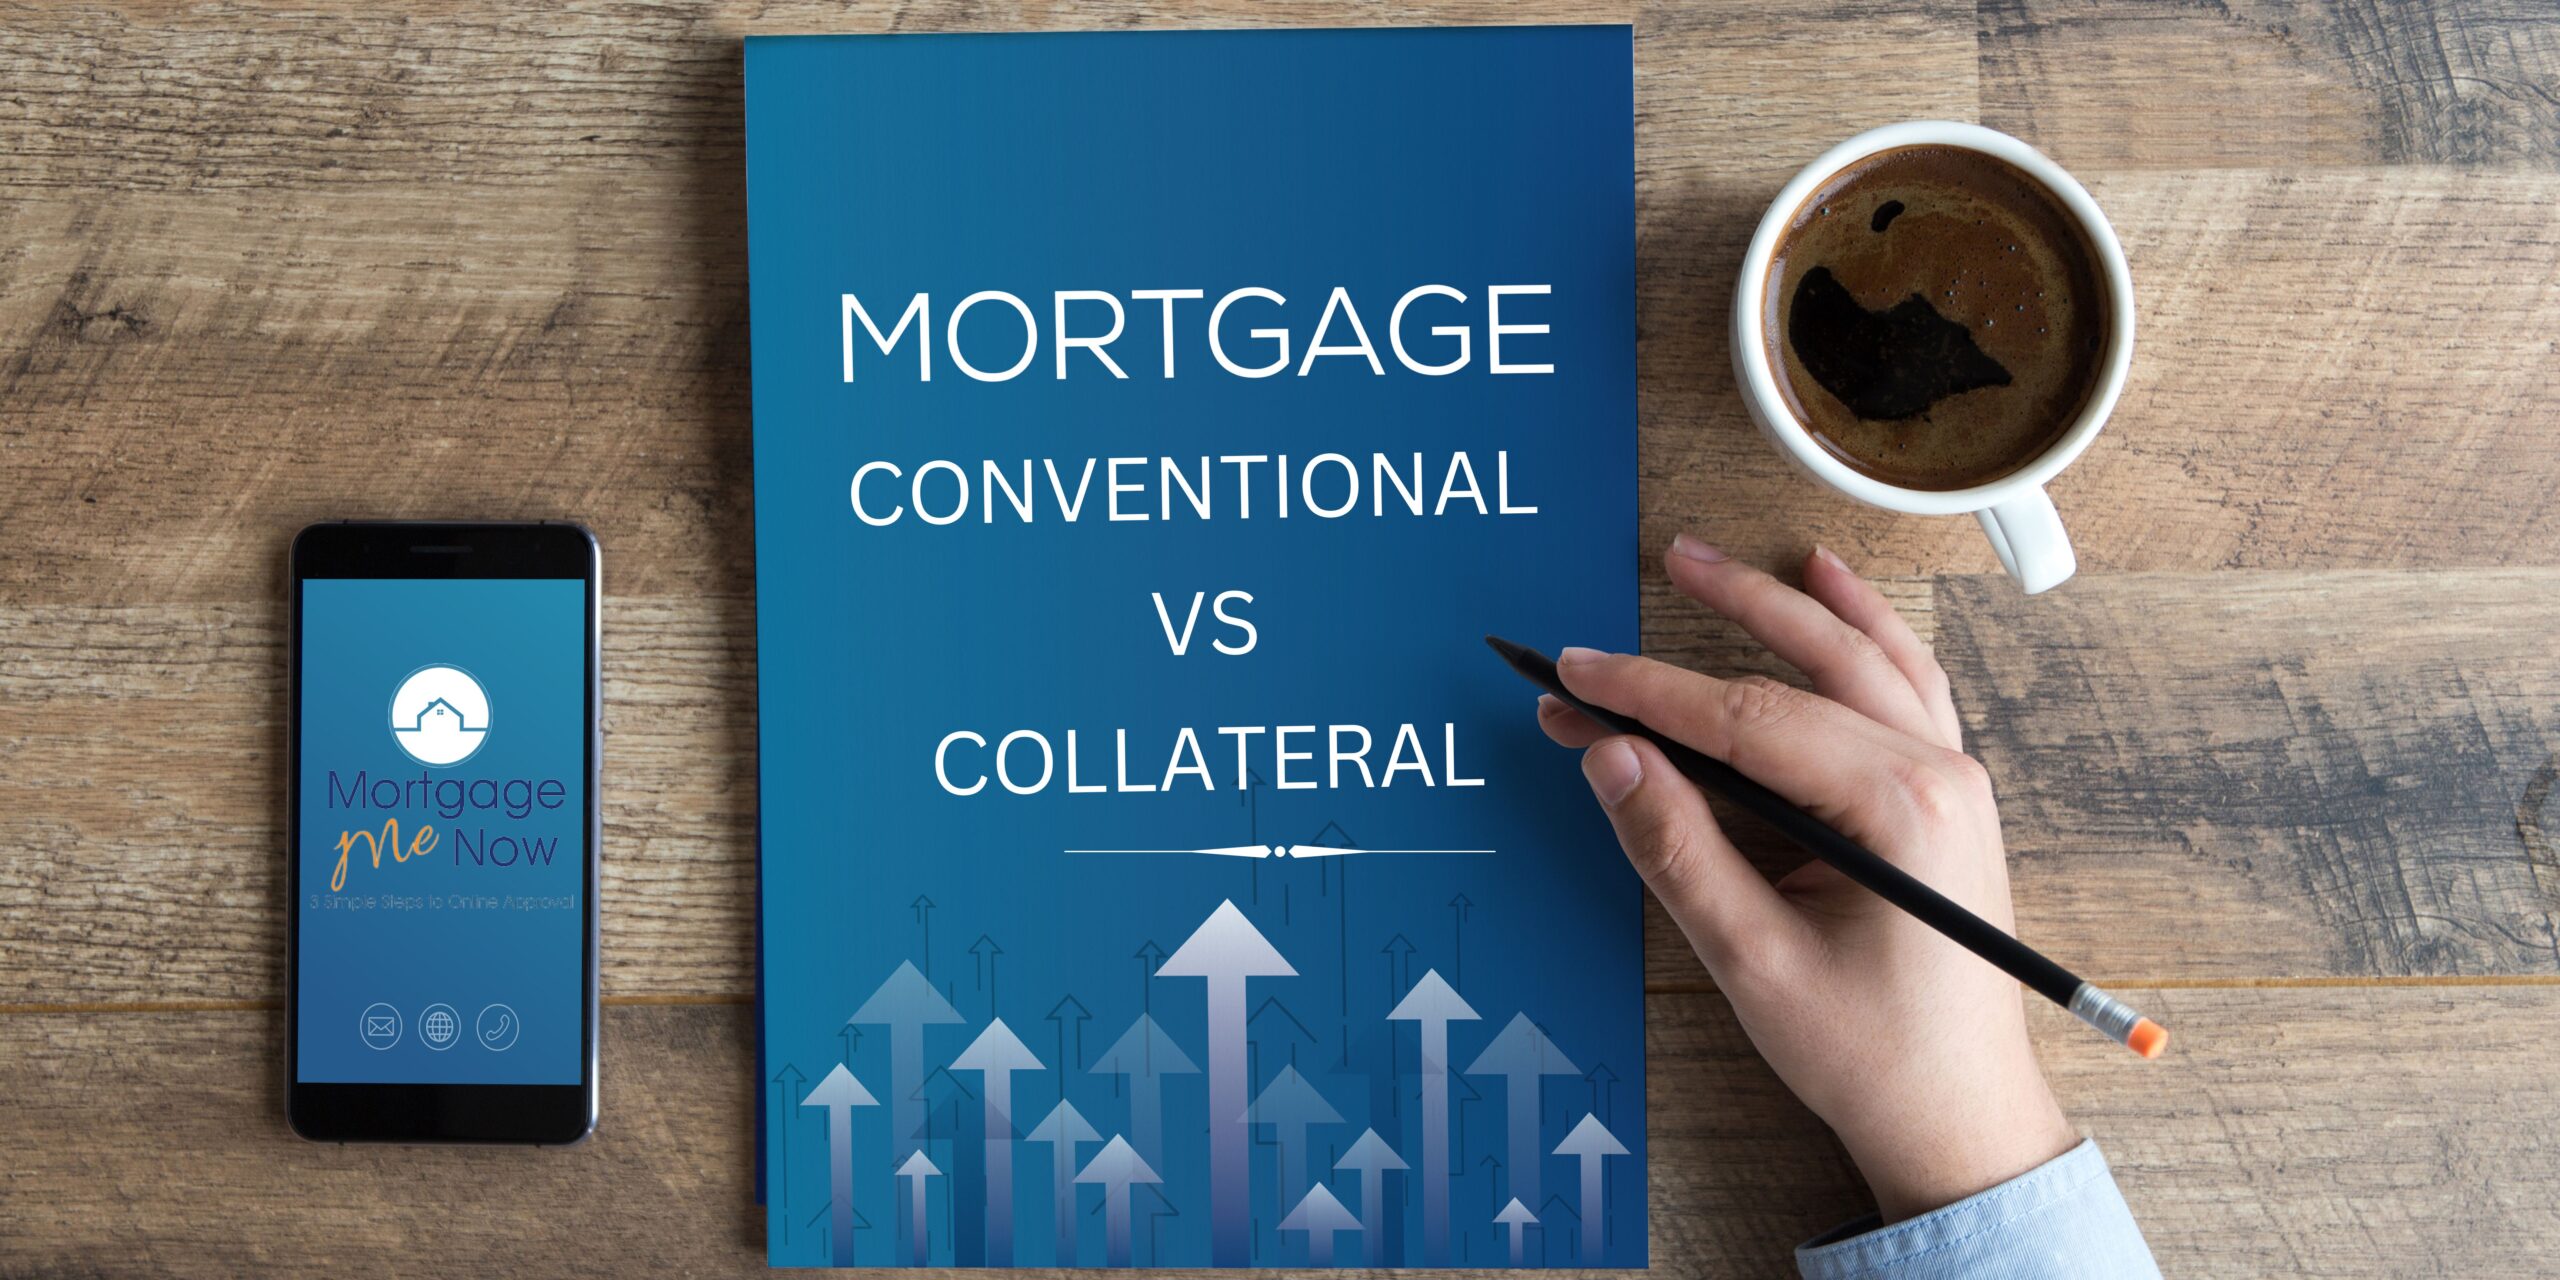 Do you know the difference between conventional and collateral mortgages?